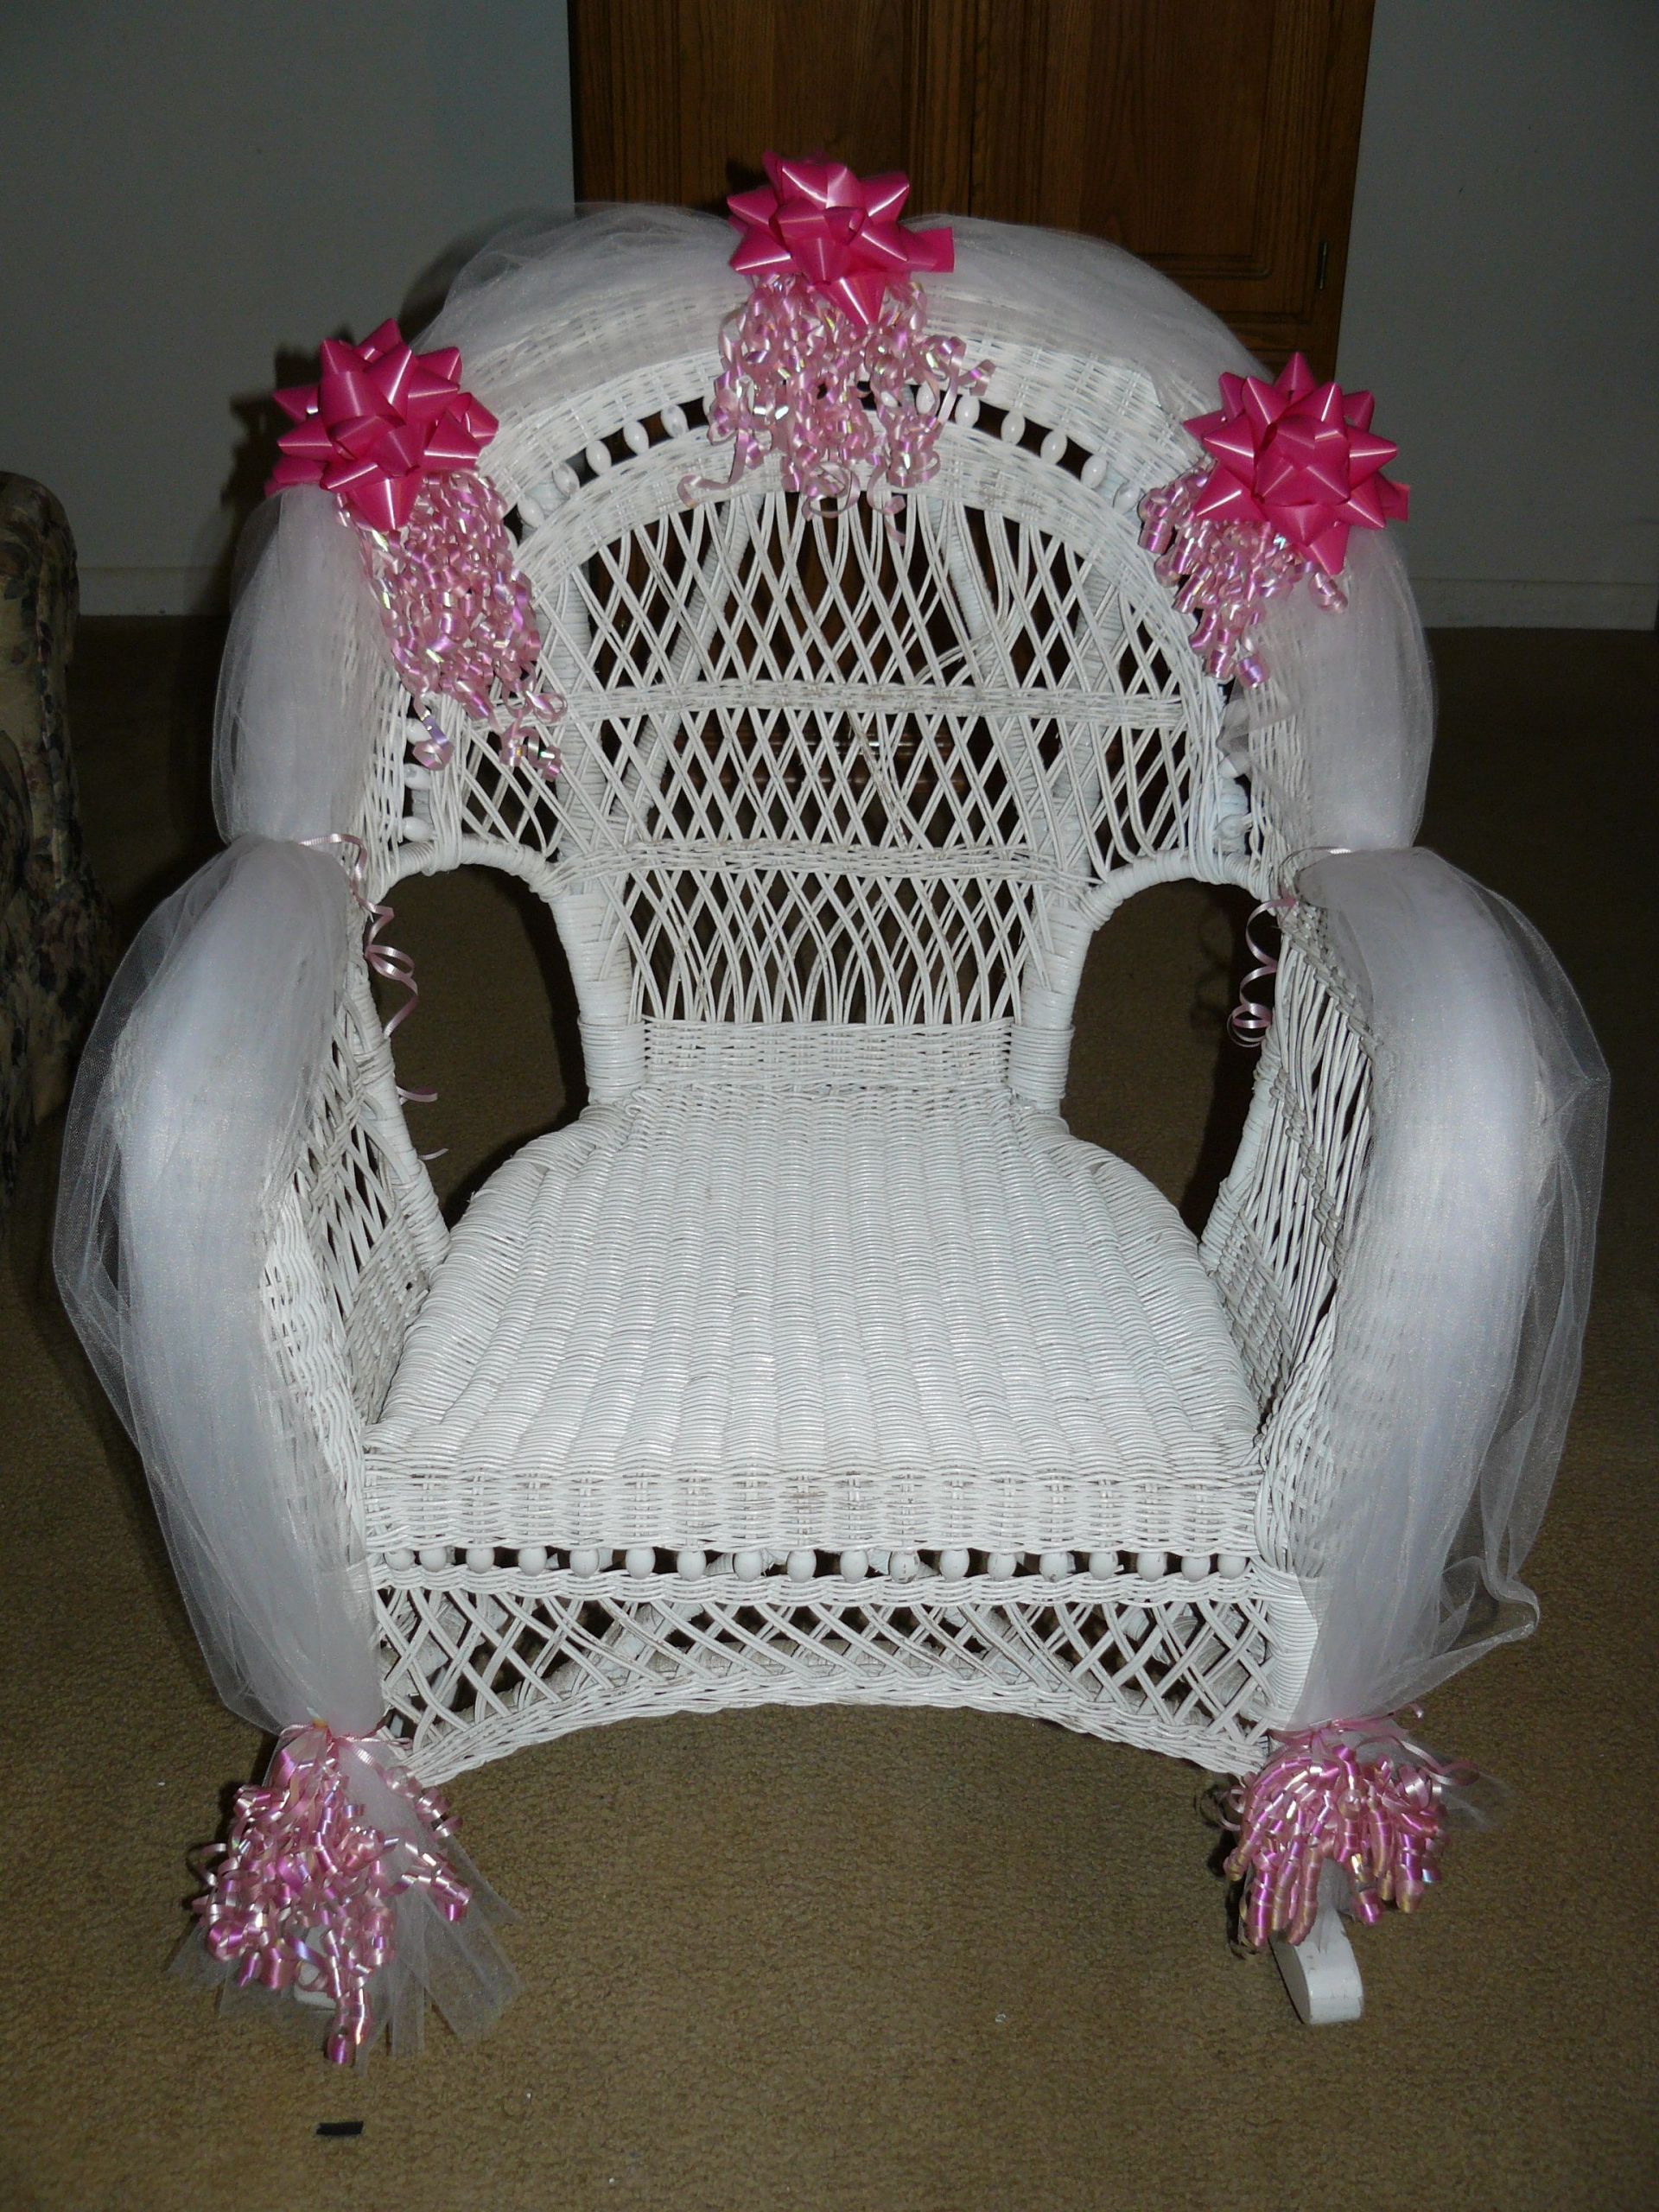 Baby Shower Chair Decoration Ideas
 Baby Shower Chair for the Mother to Be